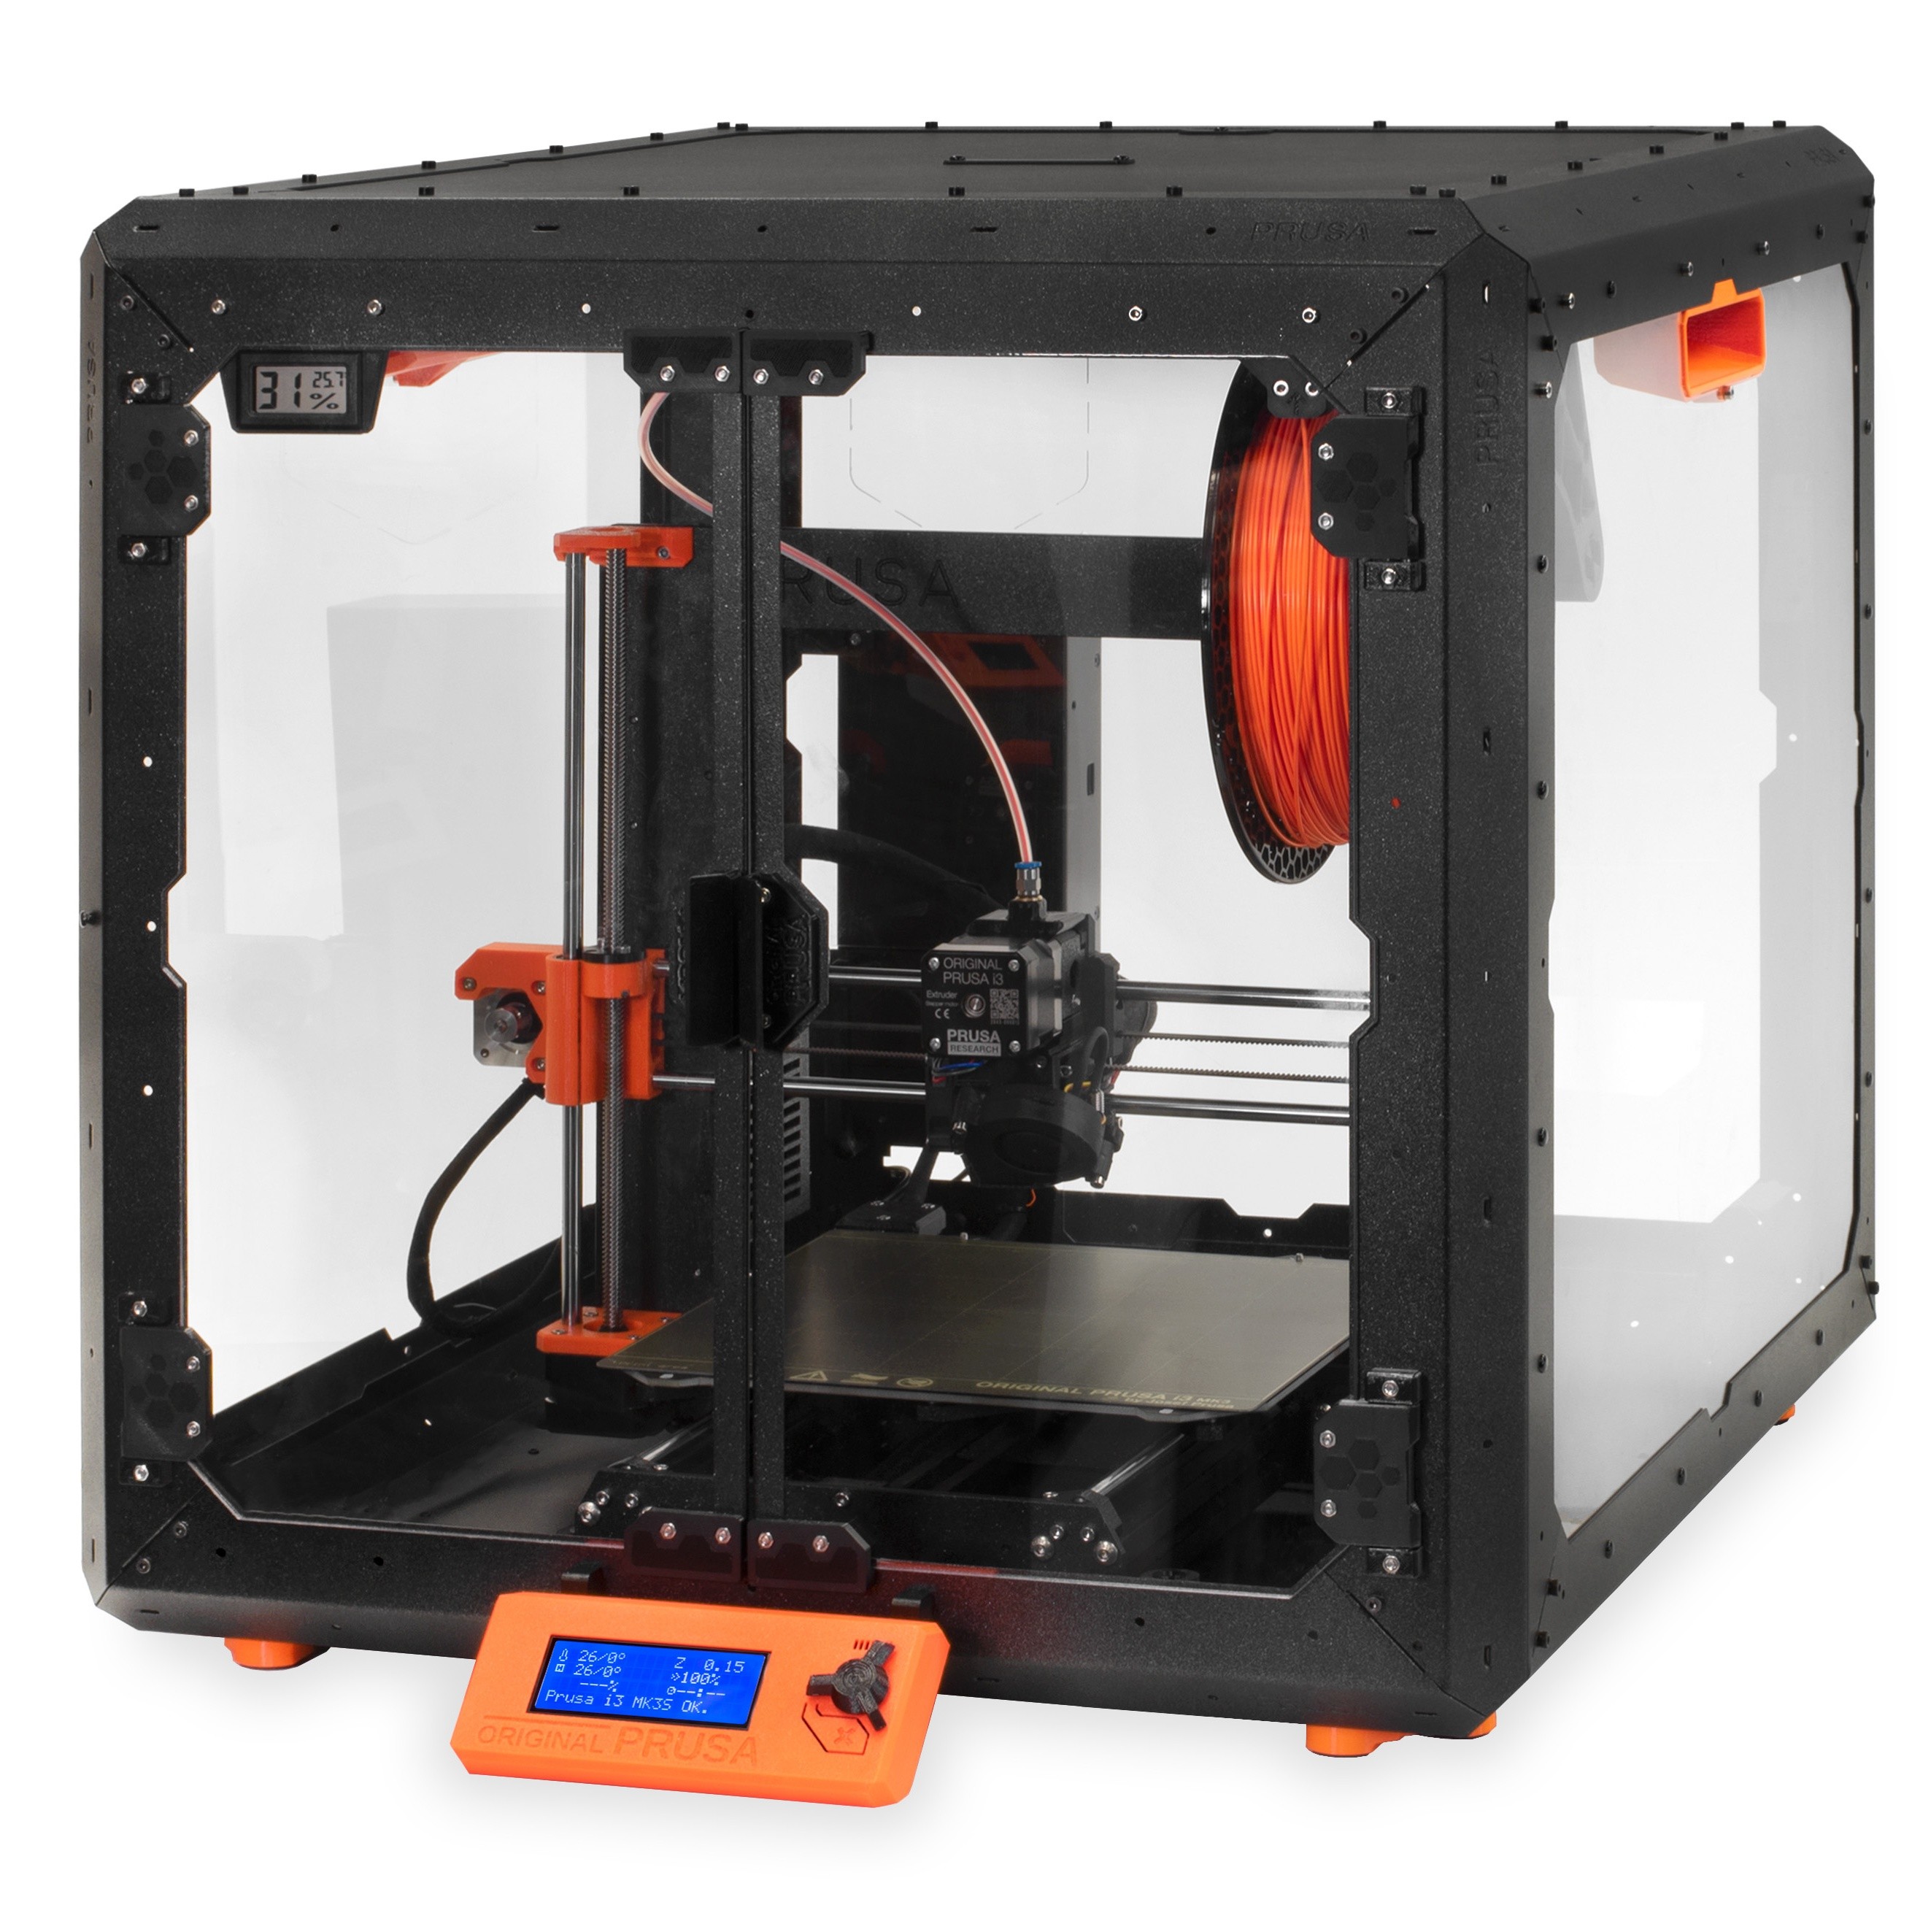 Prusa with enclosure